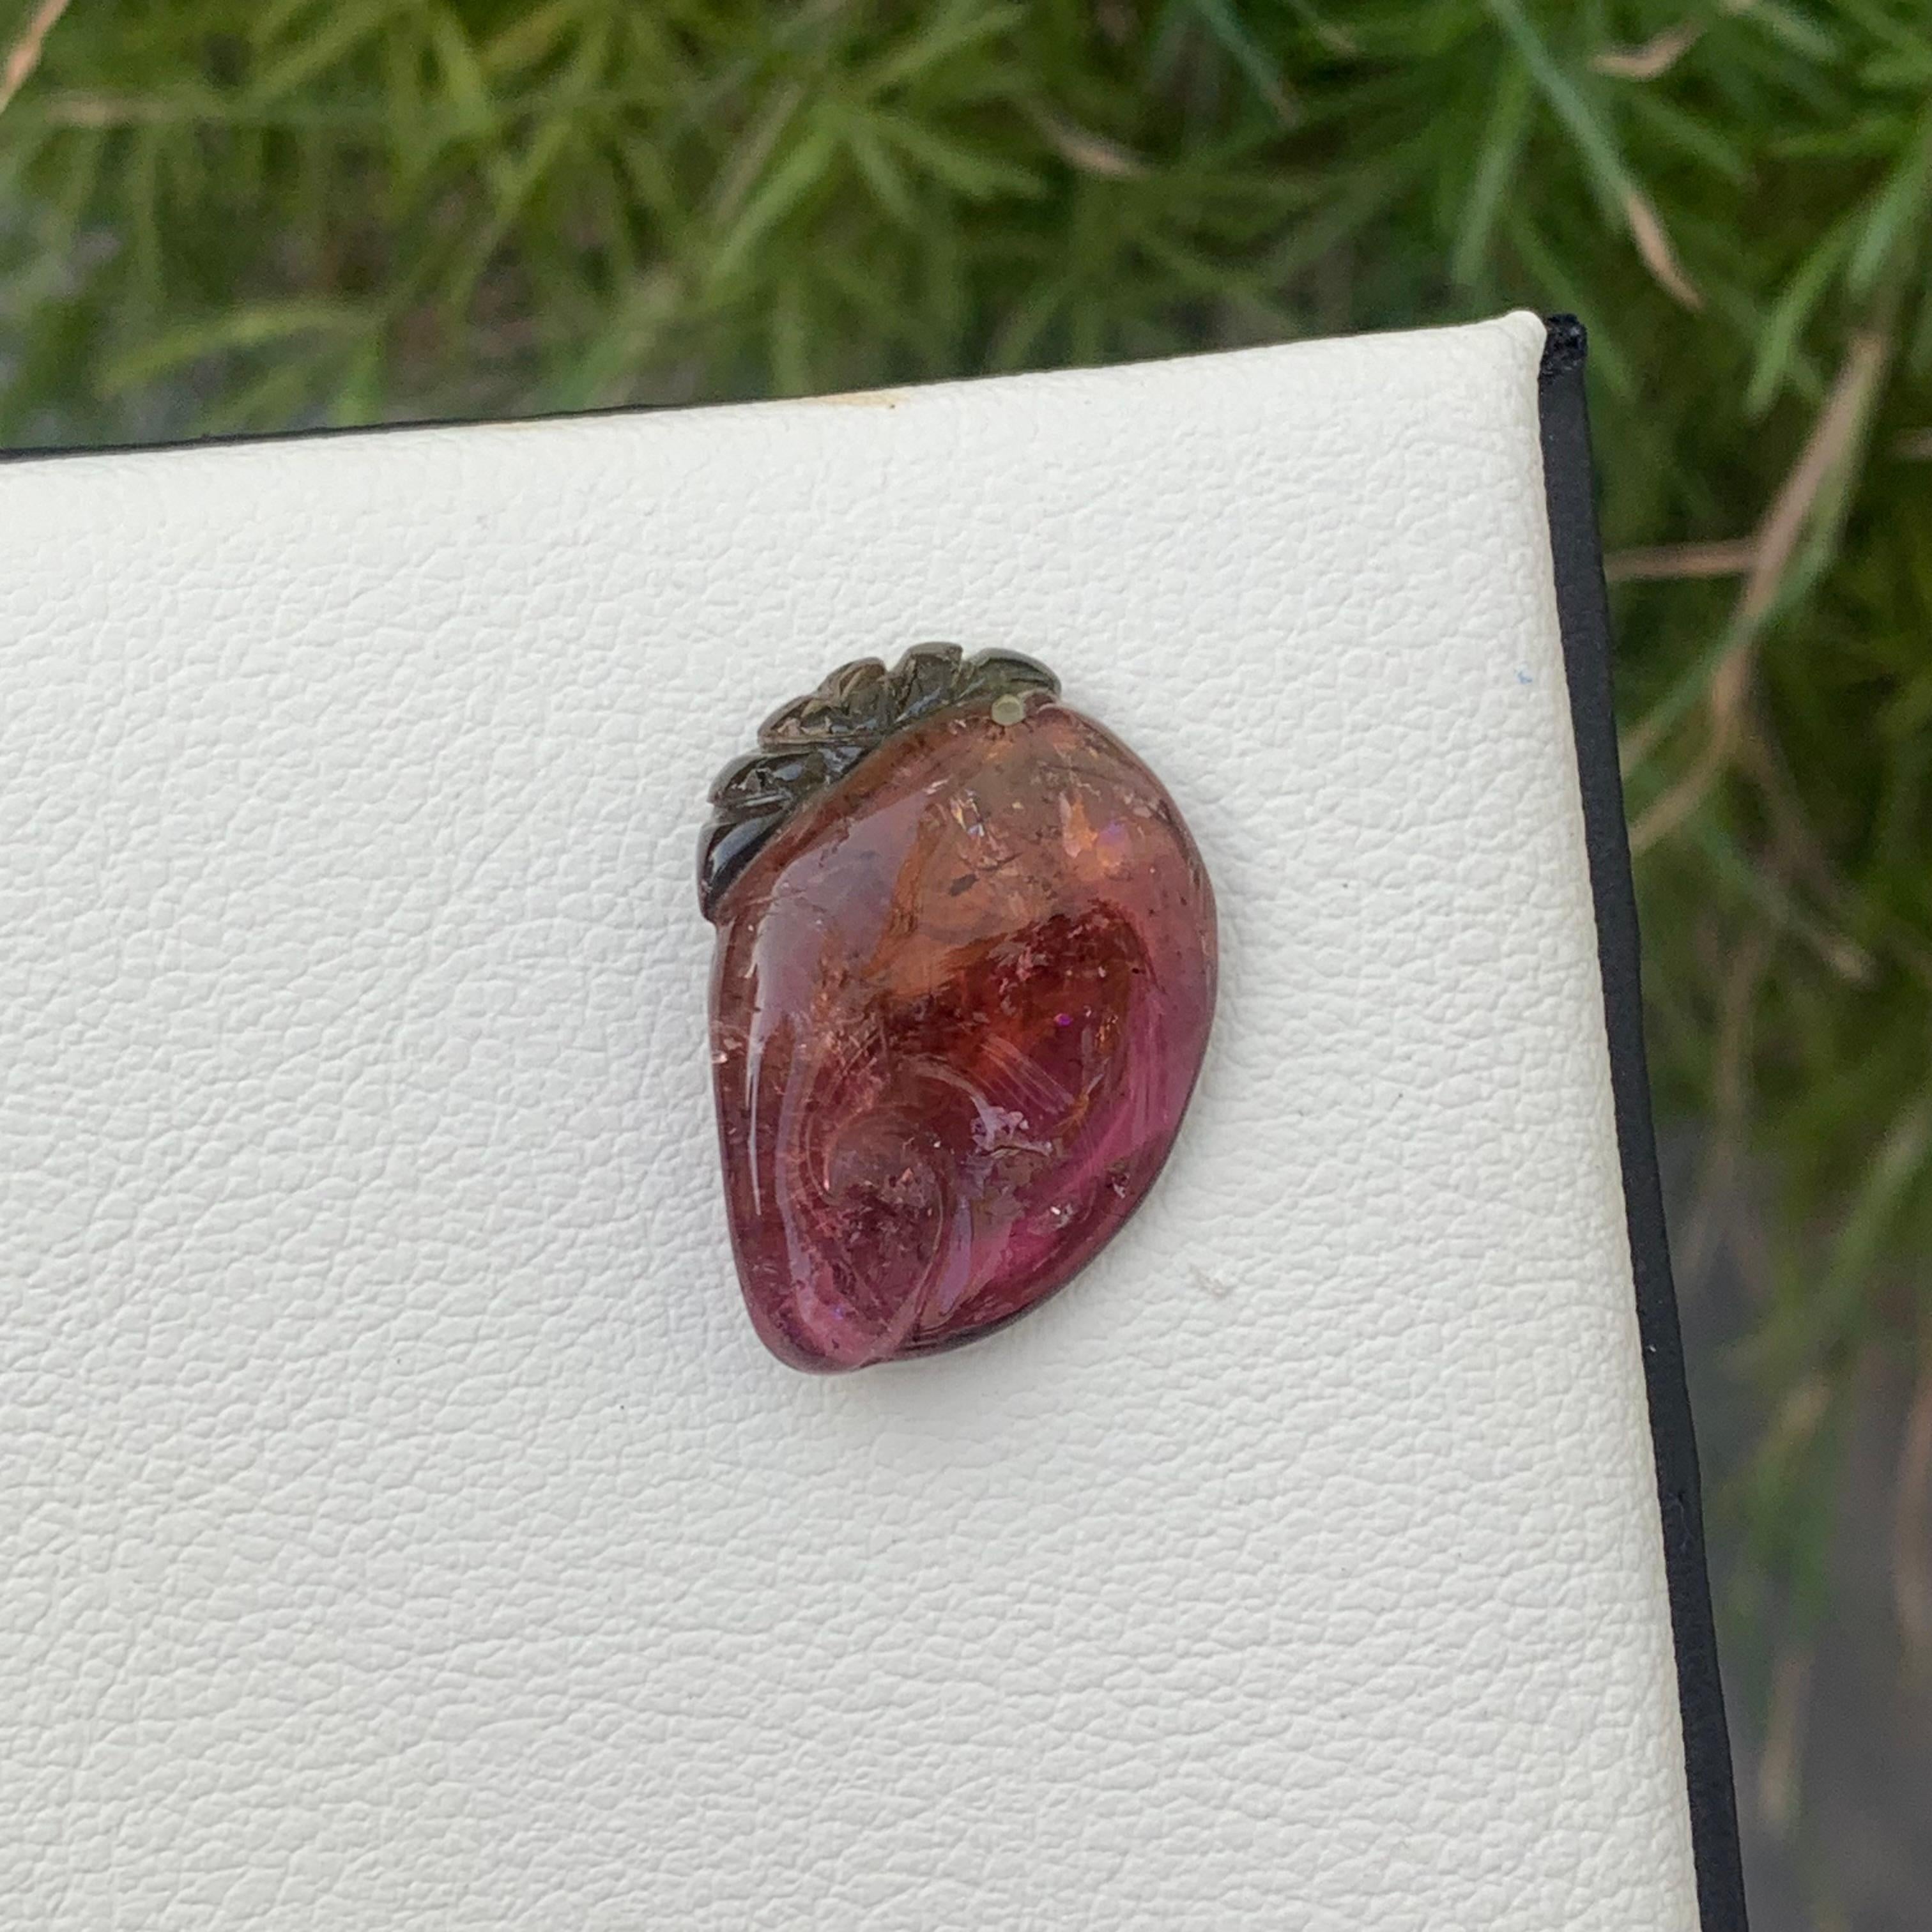 Sublime Loose Bi-Color Tourmaline Drilled Carving For Jewelry Making
Weight: 17.15 Carats
Dimension: 2.3 x 1.6 x 0.7 Cm
Origin: Africa
Color: Pink & Green
Shape: Carving
Quality: AAA

Bicolor tourmaline is connected to the heart chakra,